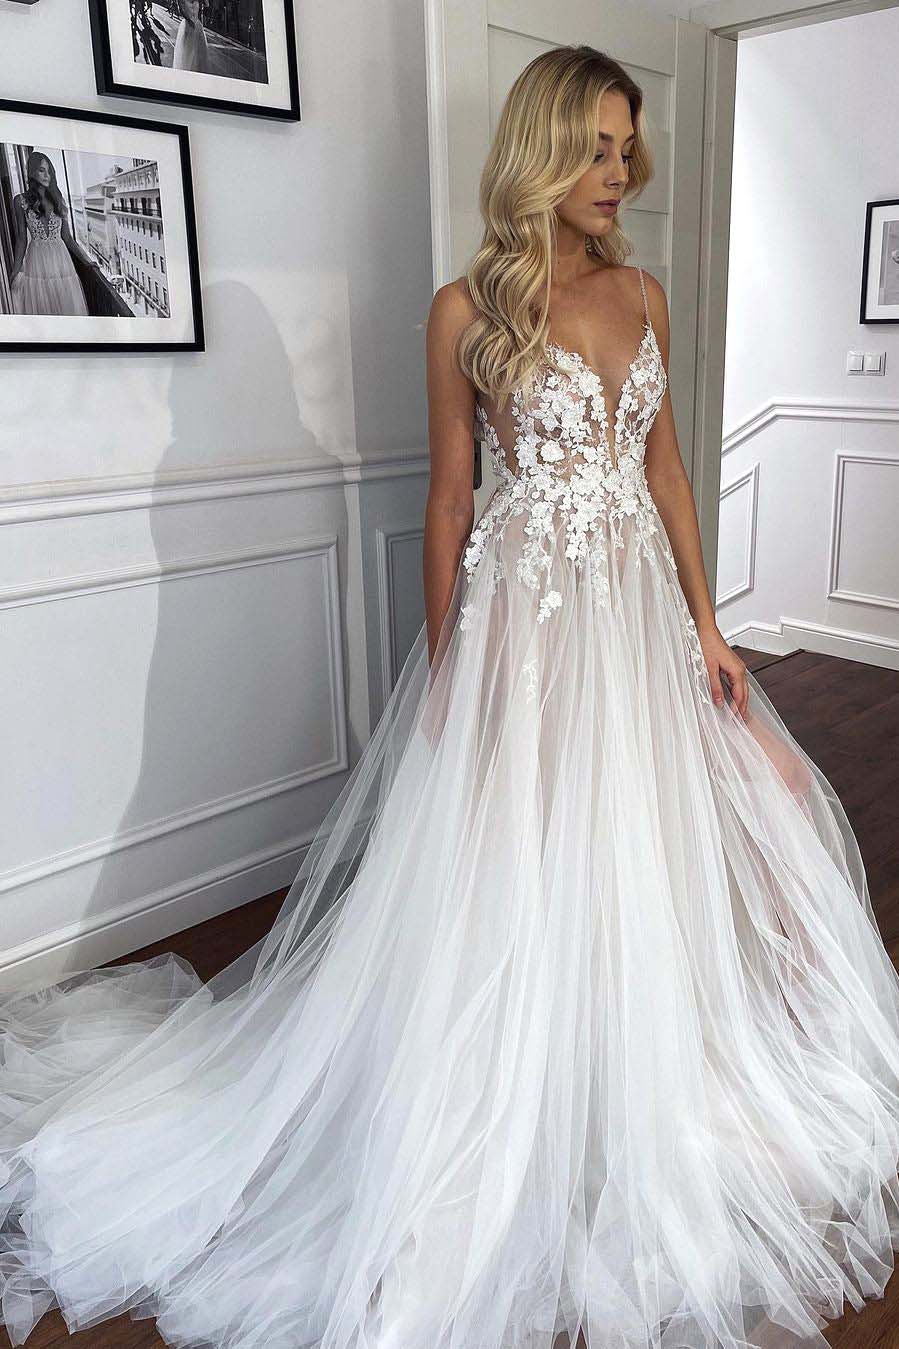 Spaghetti Straps V-Neck Lace Appliques Sheer A-line Tulle Beach Wedding Dress PW492